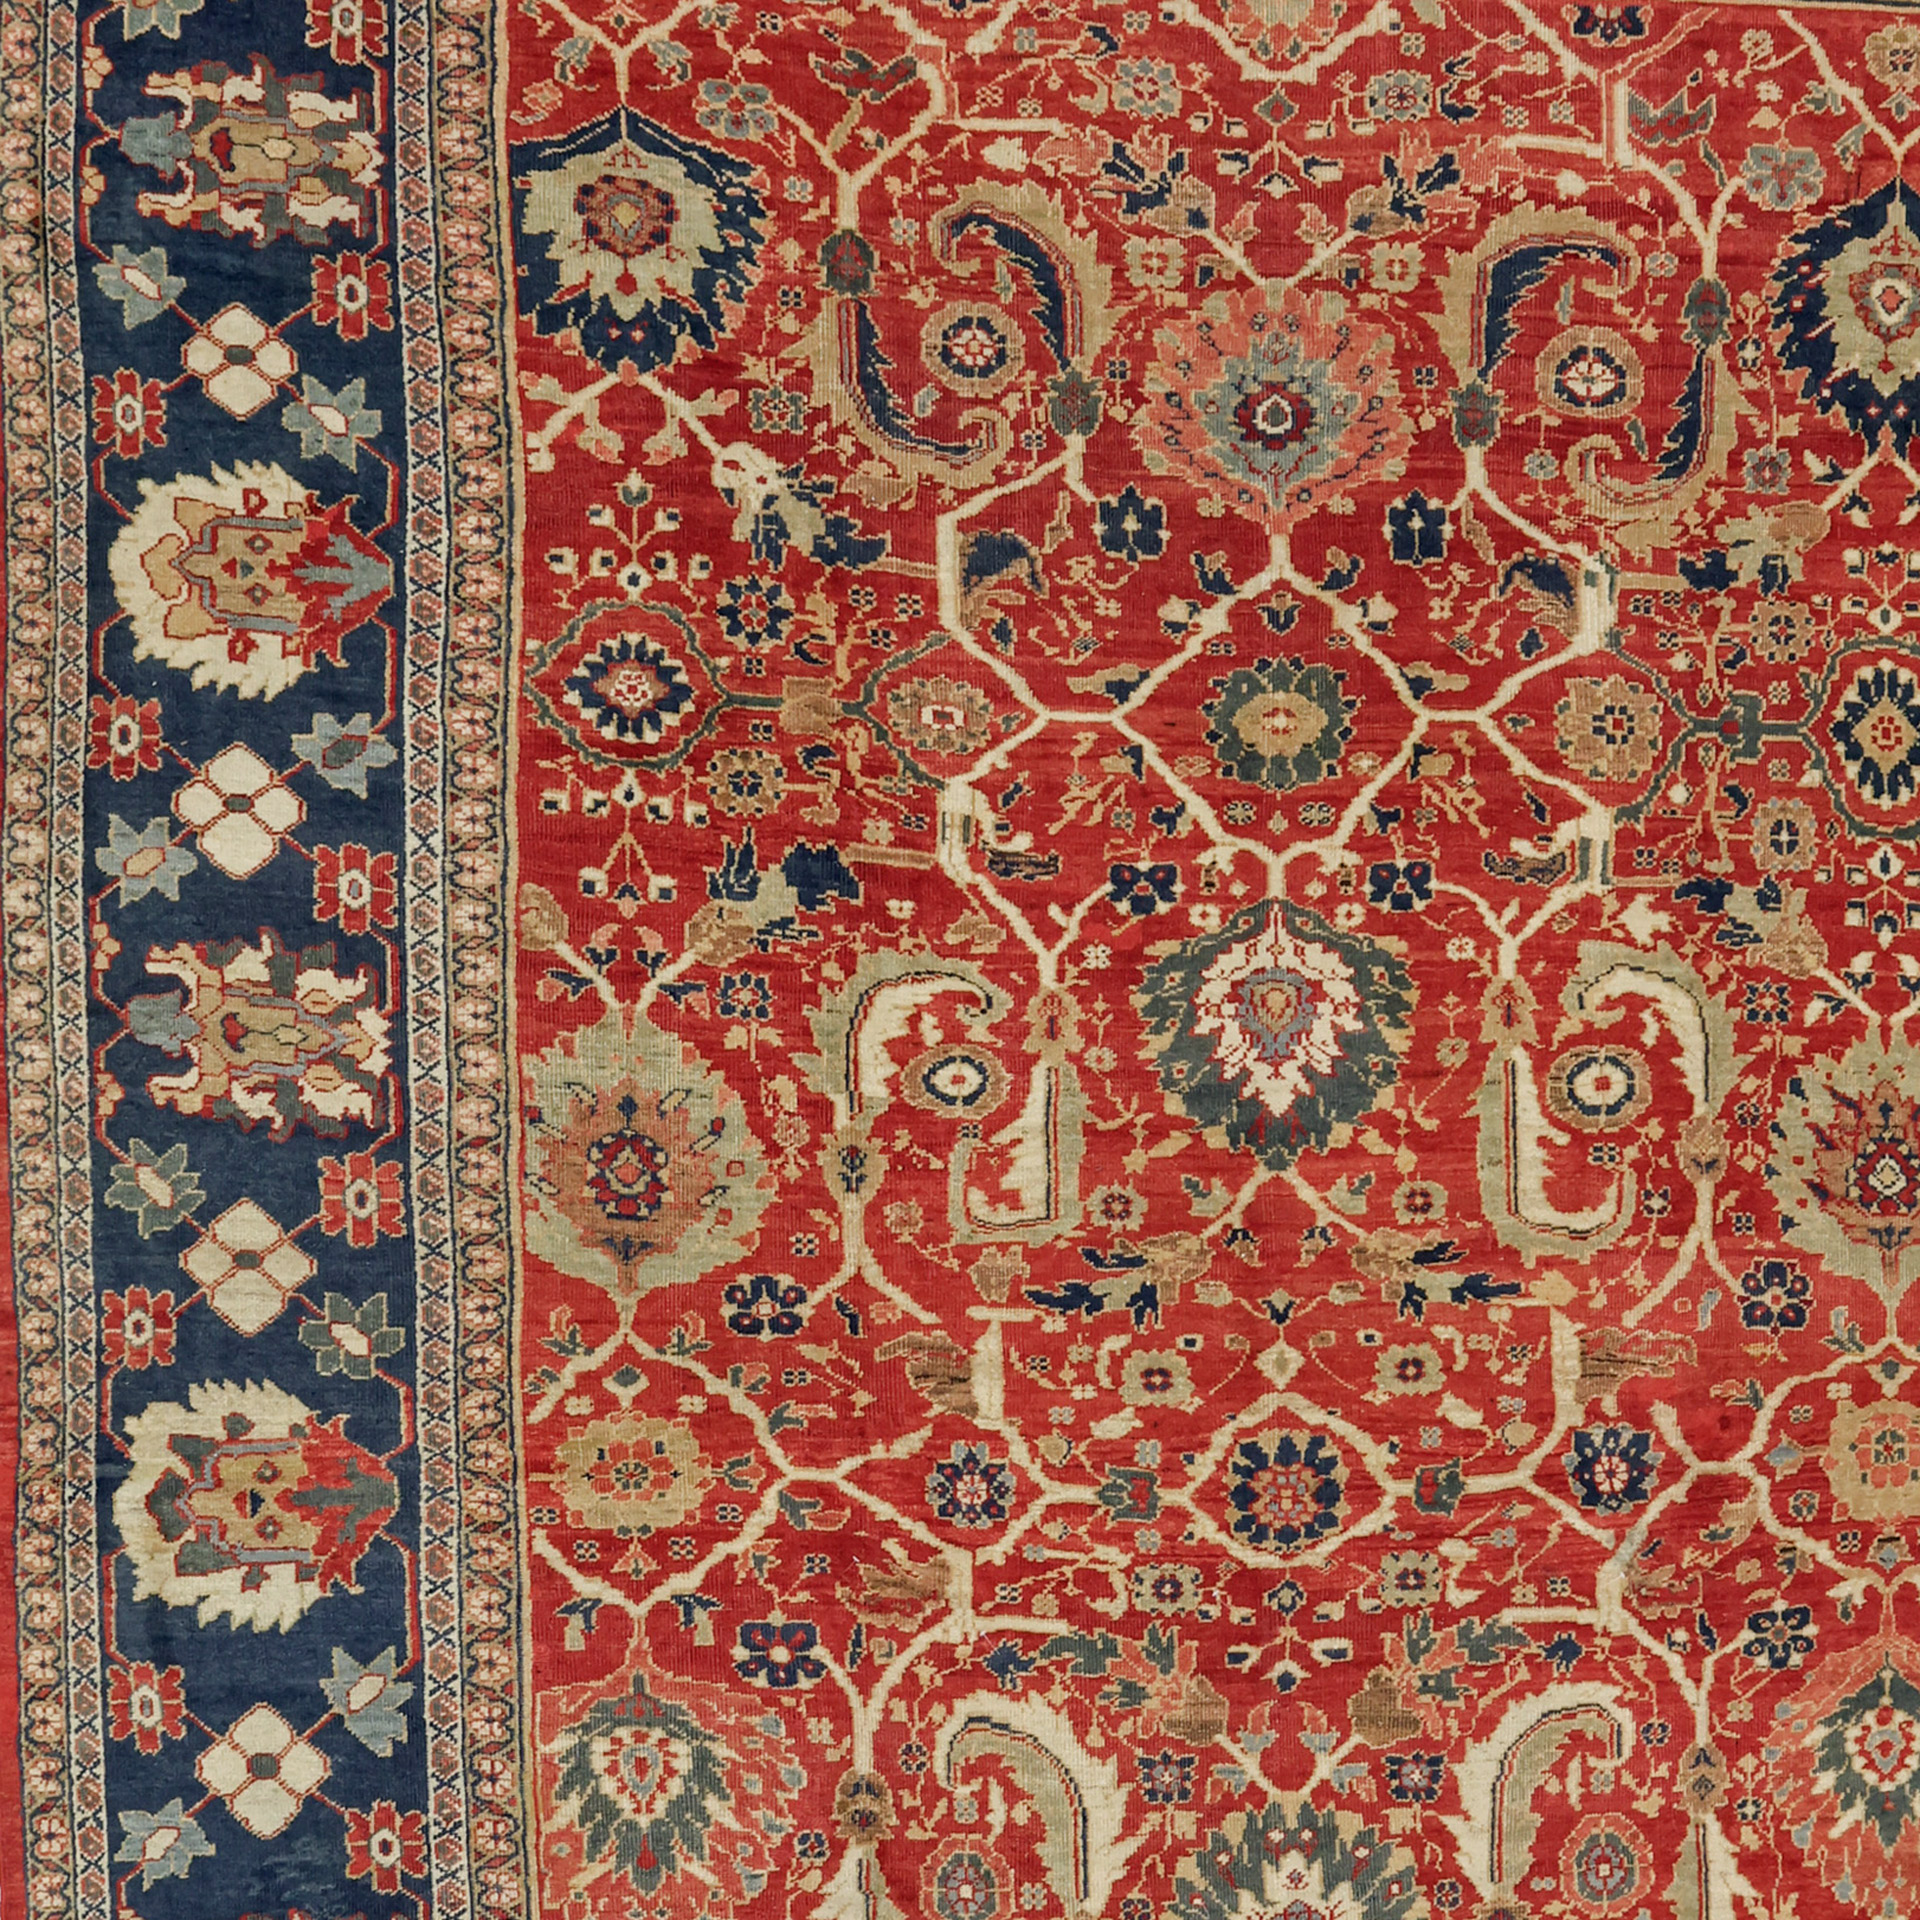 Detail photo of an antique Persian Ziegler Mahal carpet with palmettes and leaves on a brick color field that is framed by a navy border, circa 1900 - Douglas Stock Gallery, antique Oriental rugs Boston,MA area.